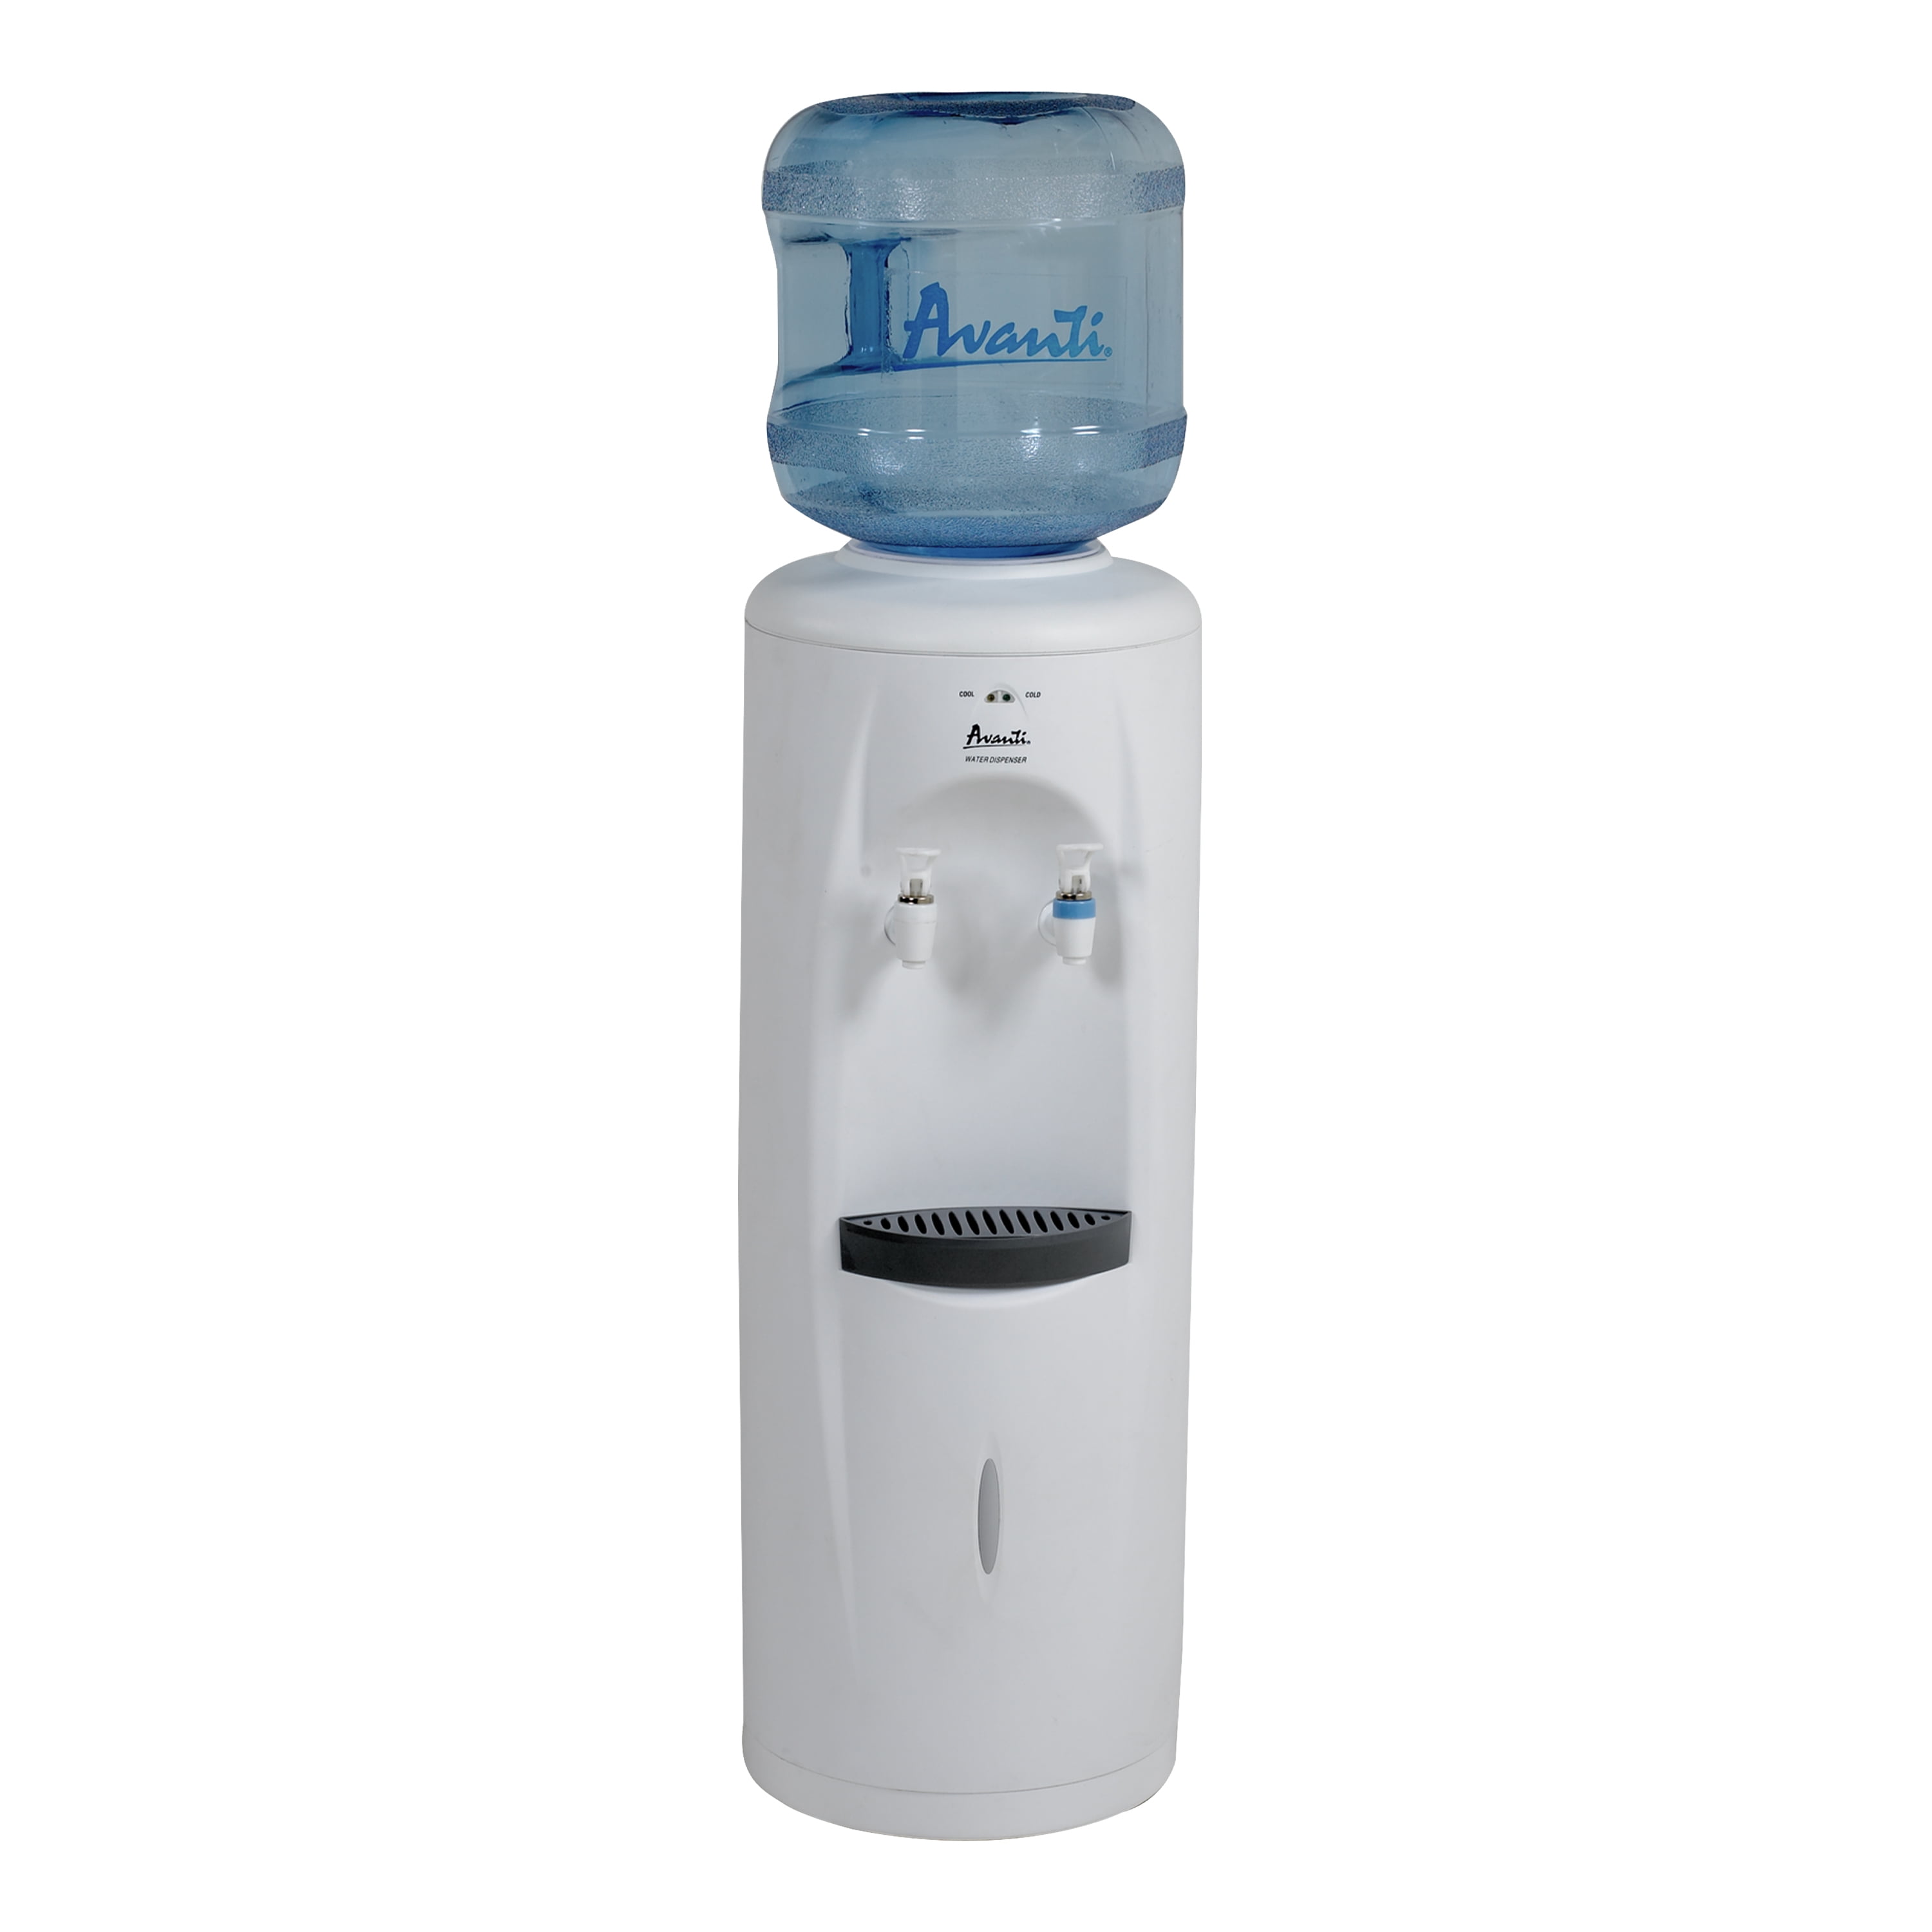 Zojirushi CD-CC40 VE Hybrid Water Boiler and Warmer with Descaling